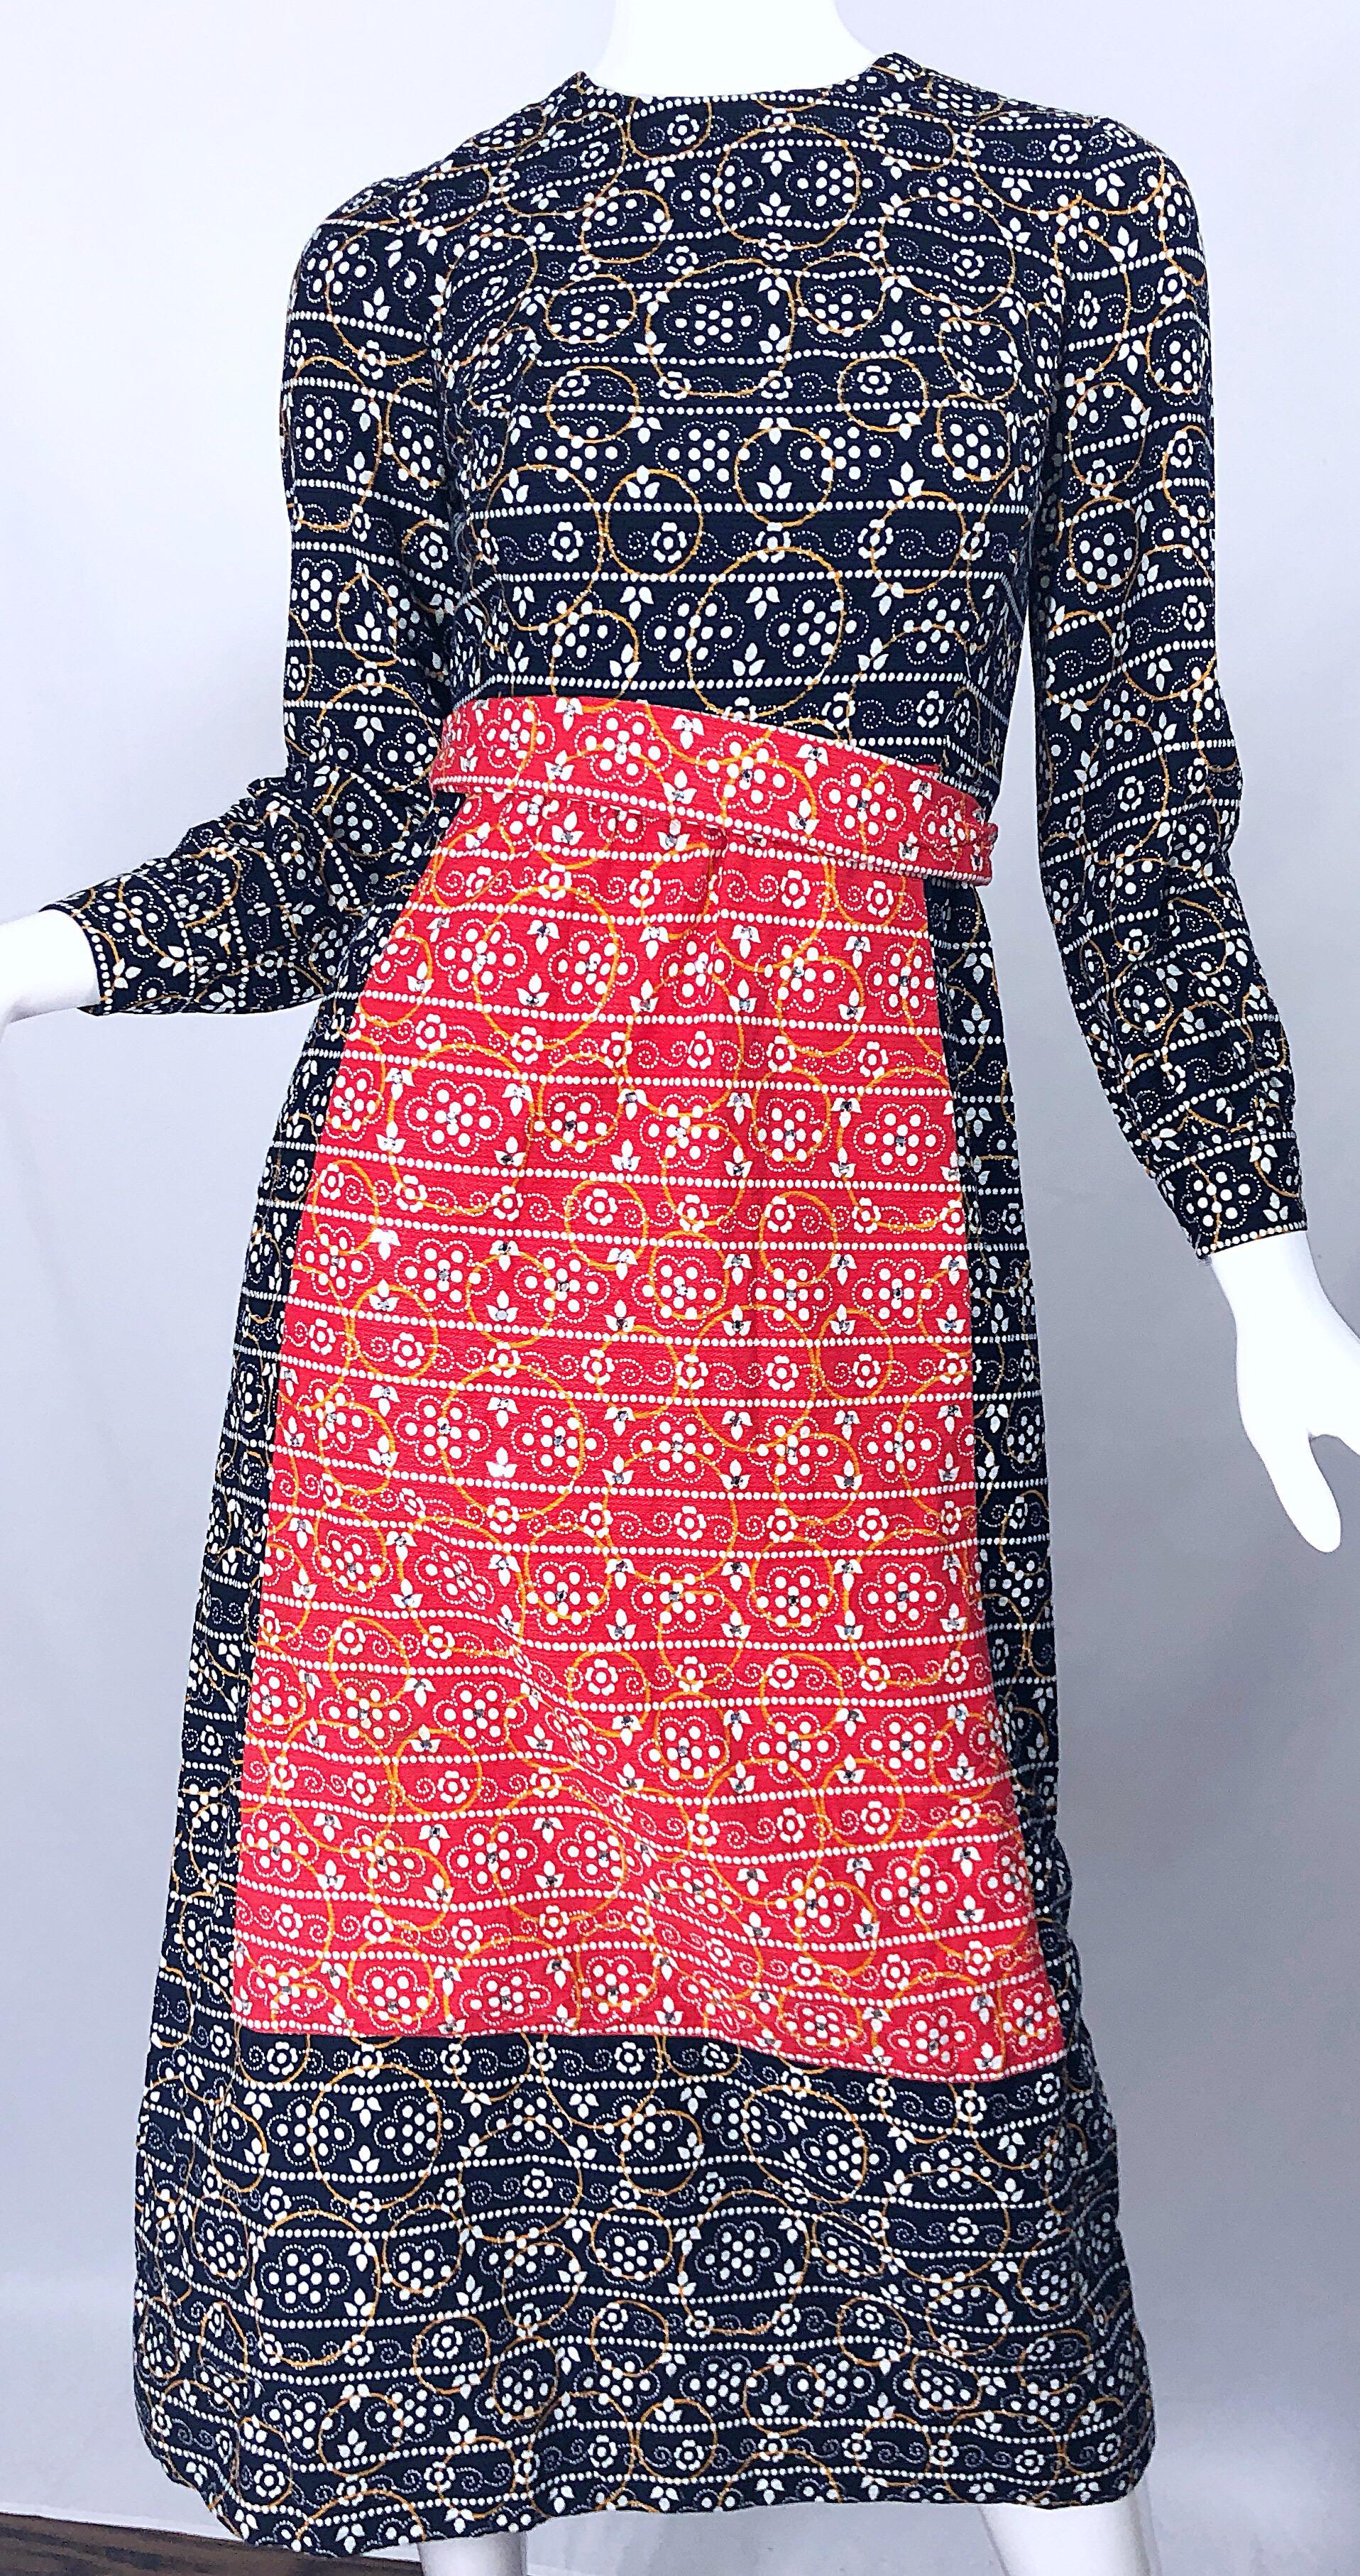 Chic vintage 1970s JOSEPH BRENNAN red, white and navy blue trompe O'leil rhinestone encrusted midi dress! Features a navy blue, white and yellow bodice and skirt, with the front of the skirt in red (to look like an apron). Hundreds of rhinestones